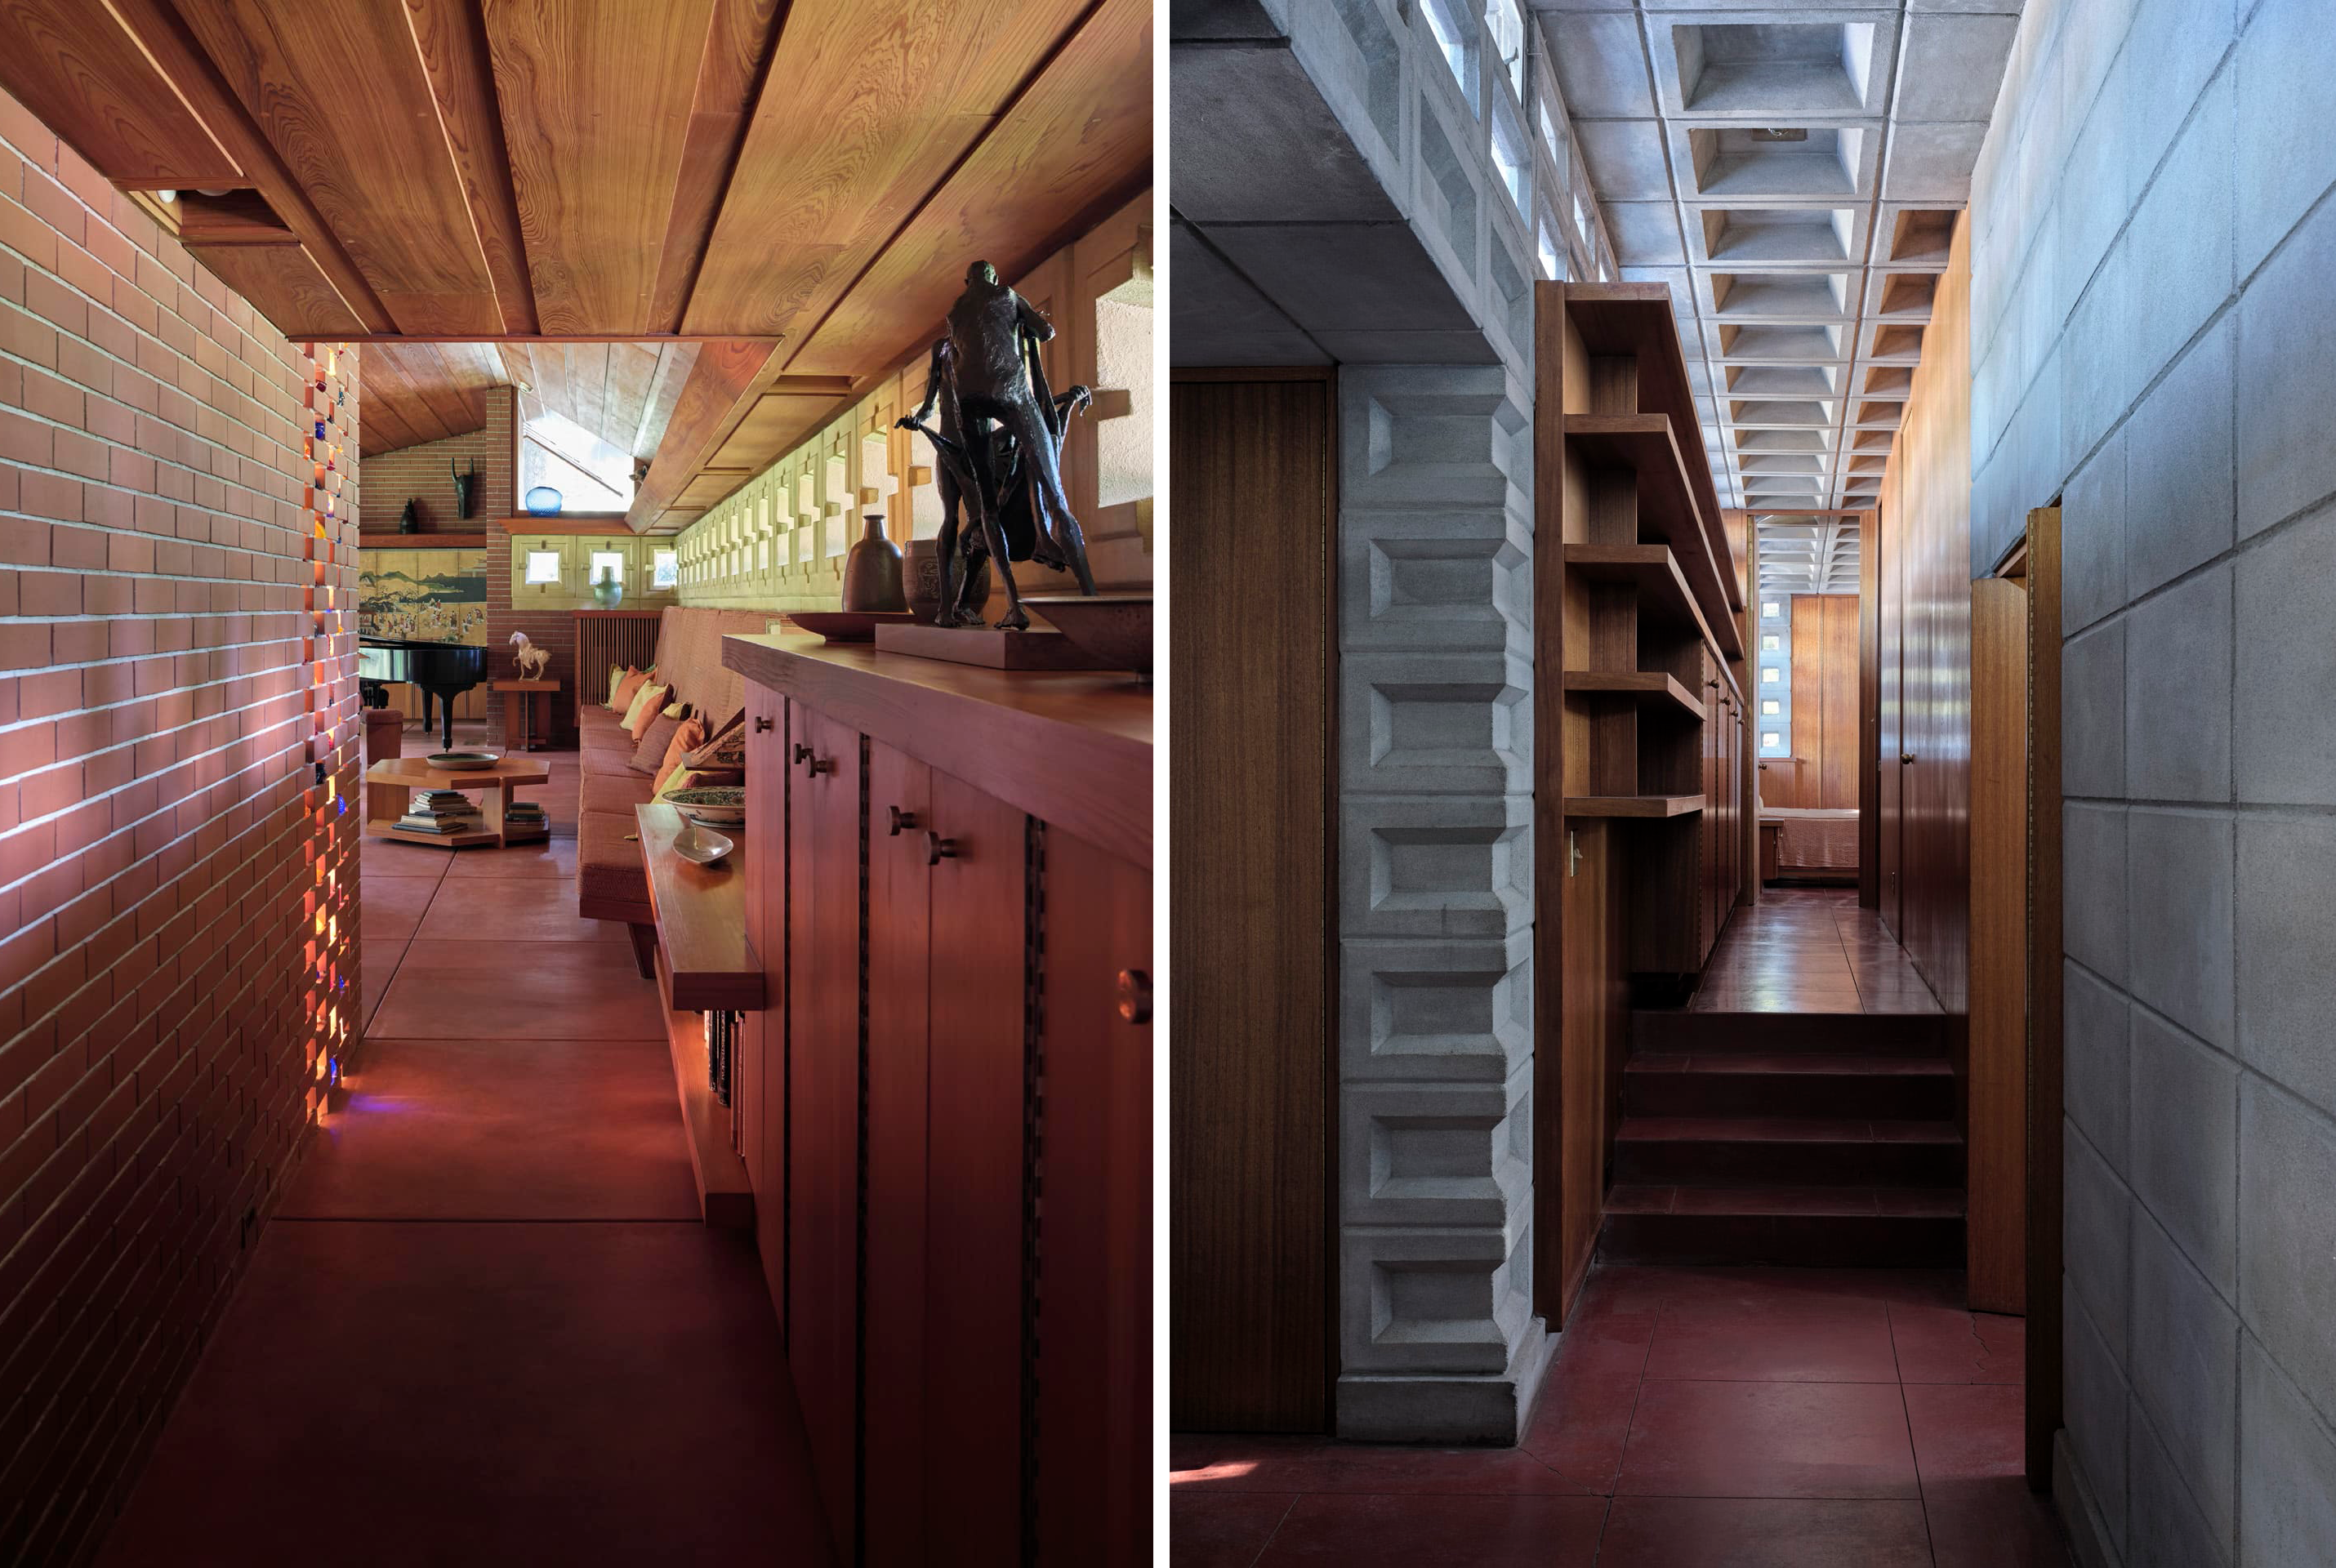 Two vertical photos side-by-side allowing comparison of long corridor views of a Usonian and a Usonian Automatic house